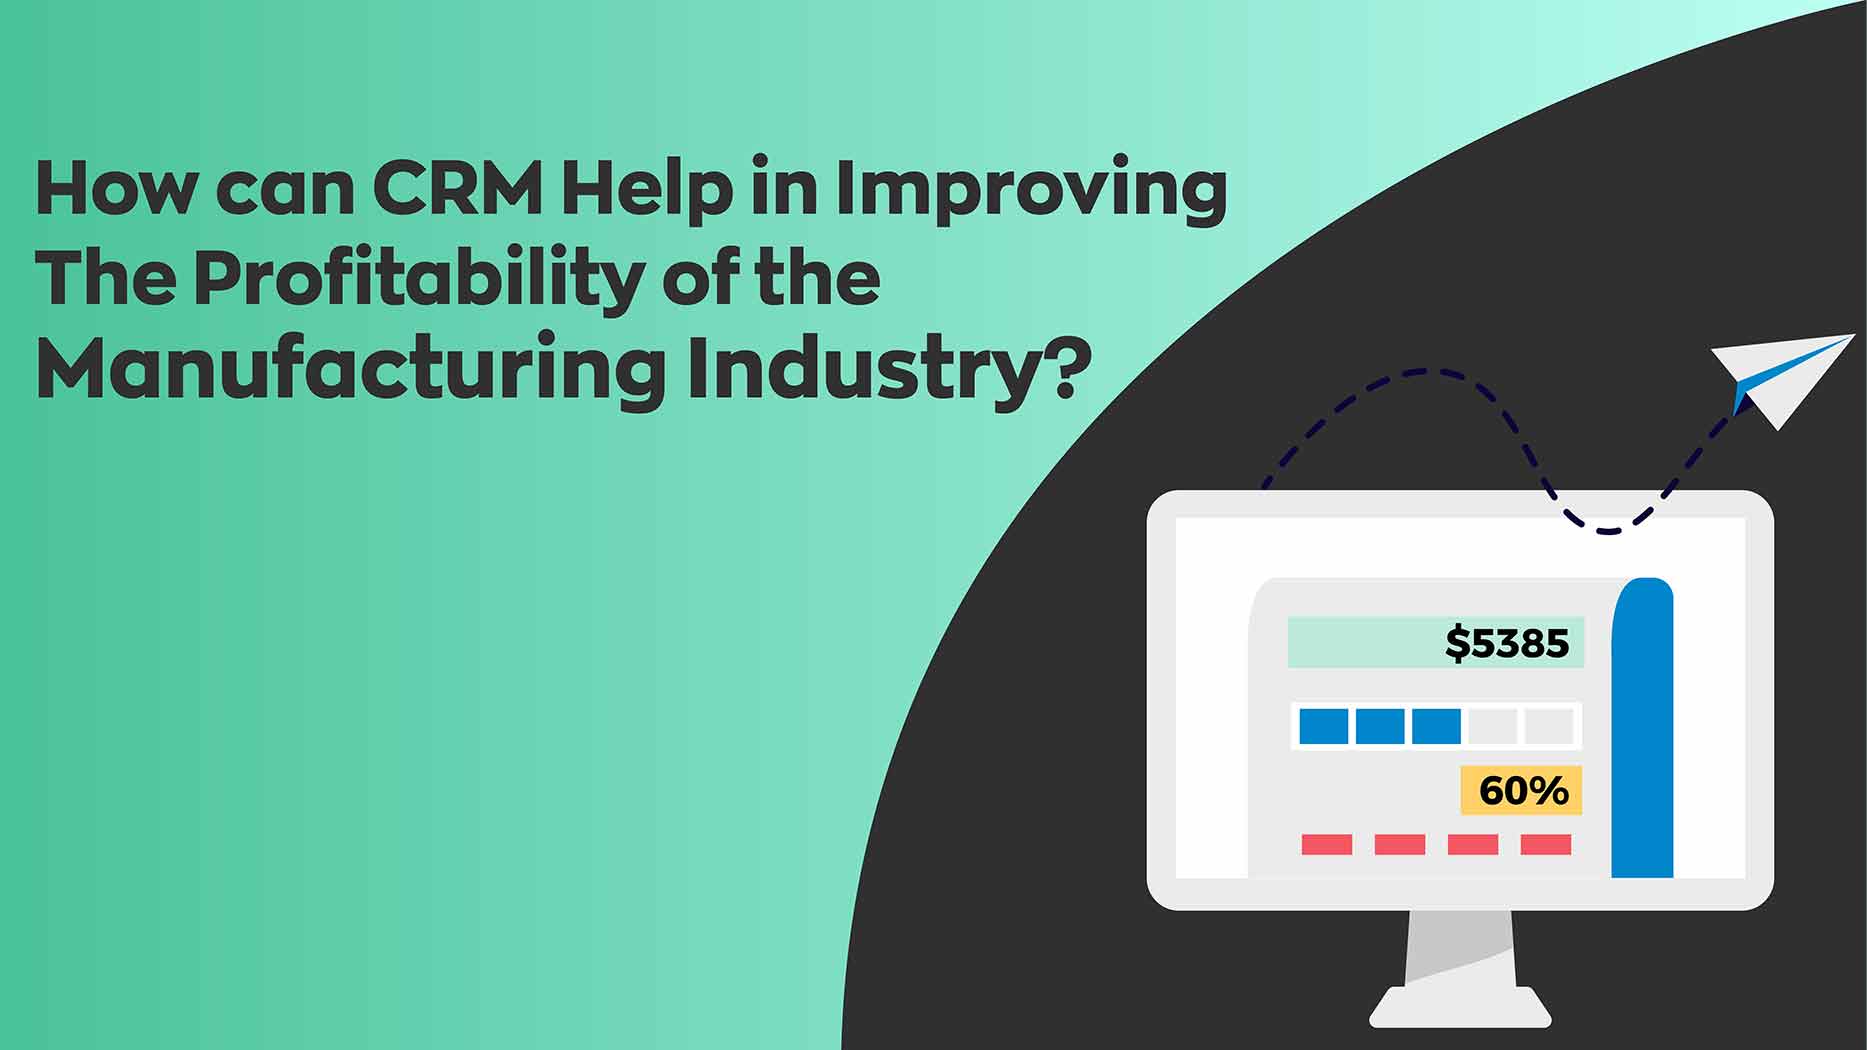 How can CRM help in improving the profitability of